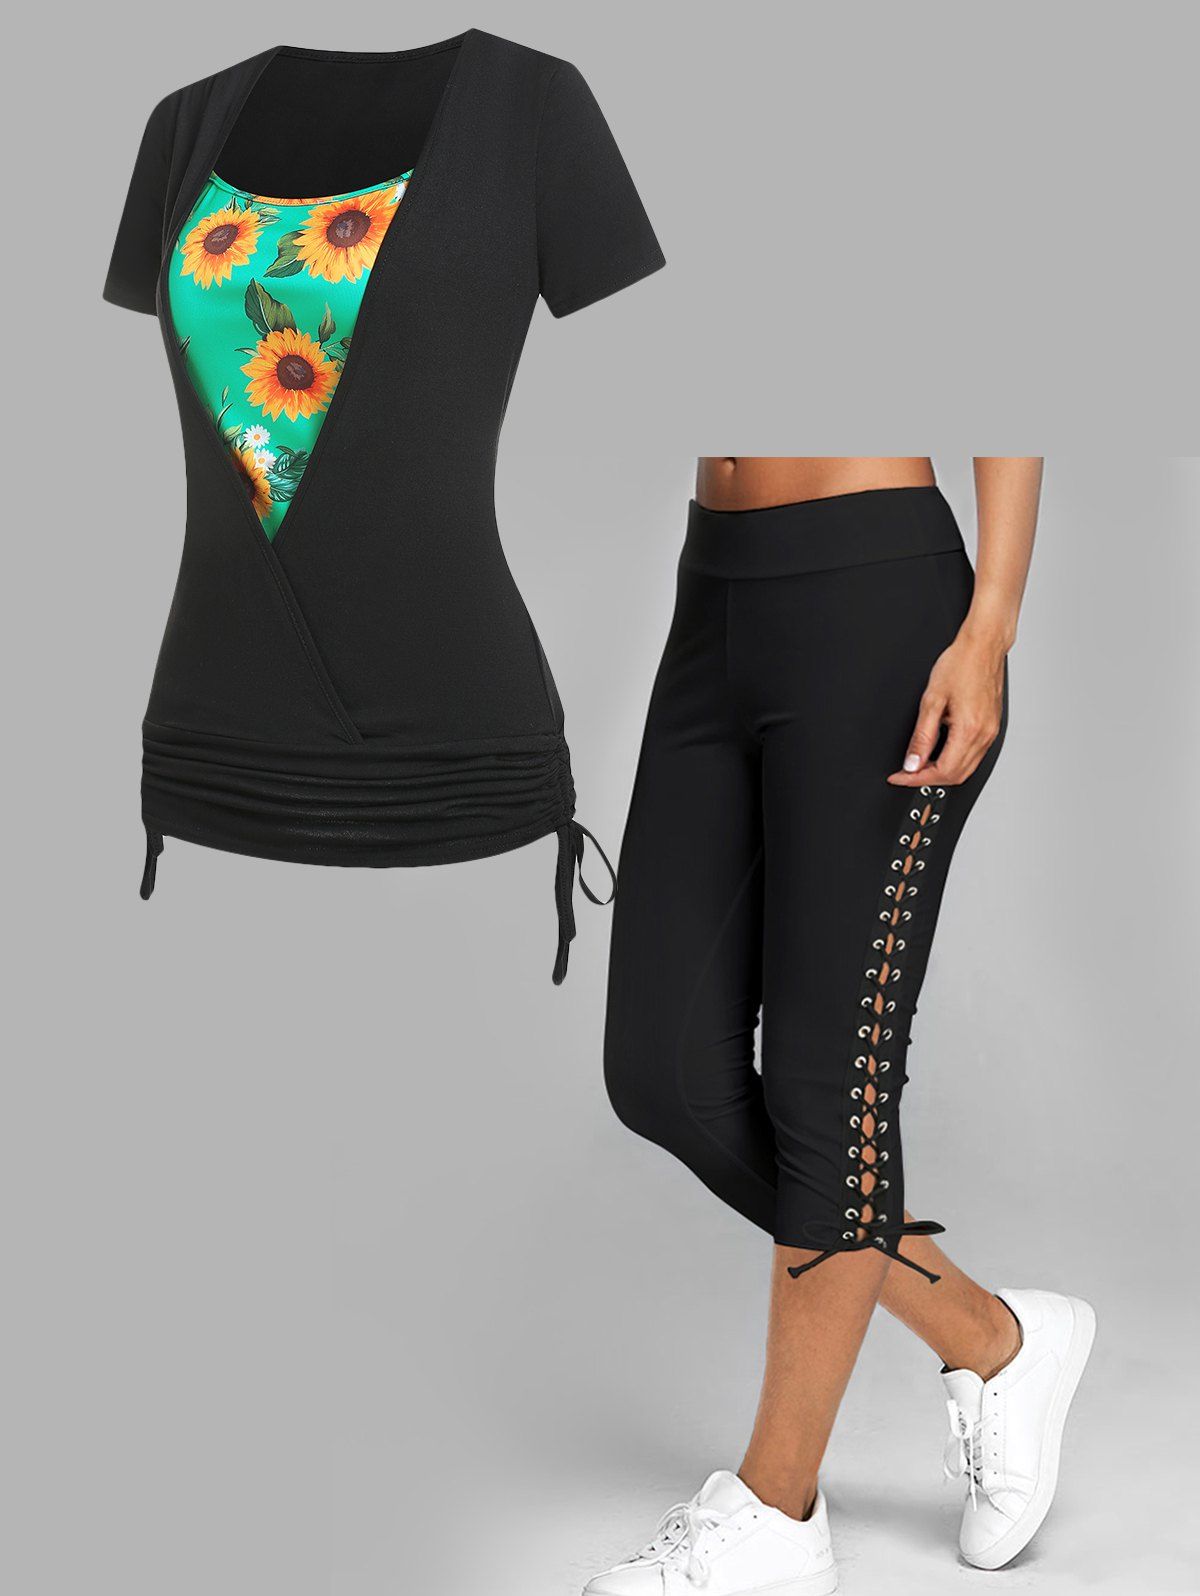 Surplice Tee Cinched Tie Ruched Sunflower Floral Print Faux Twinset T Shirt and Lace Up Skinny Crop Leggings Casual Summer Outfit - BLACK S